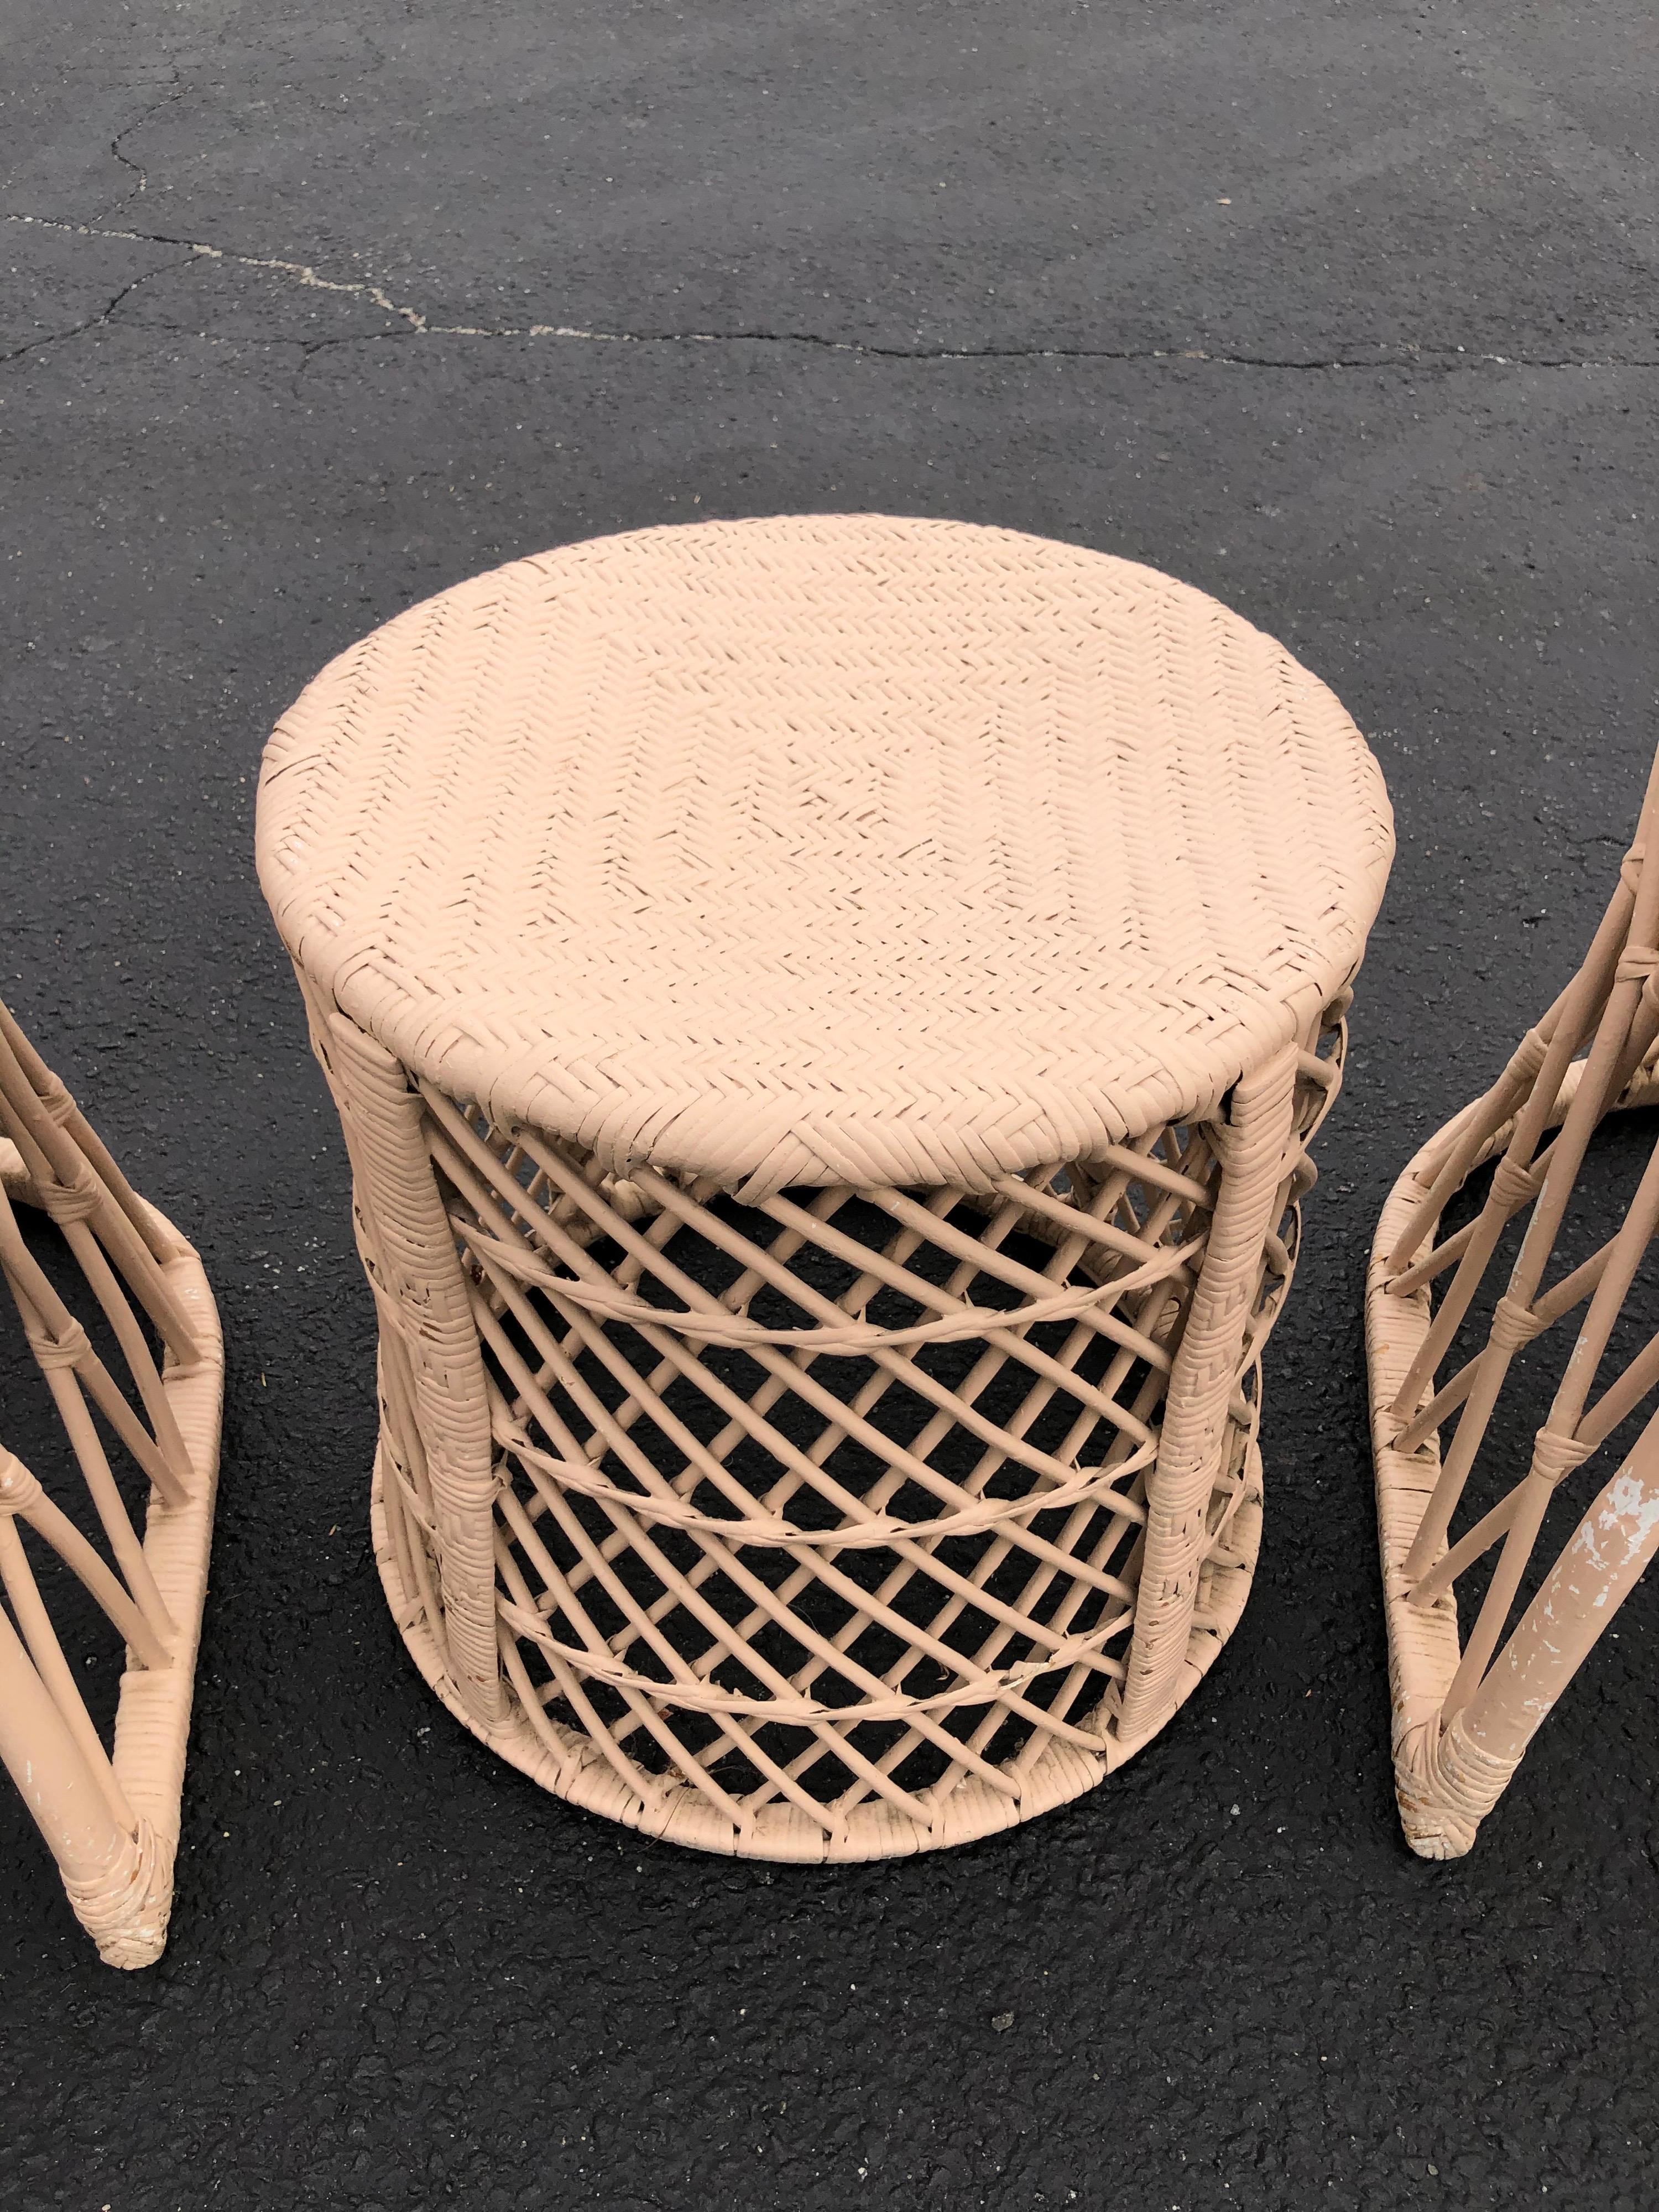 Pair of Mid Century Wicker Chairs with Matching Table 1